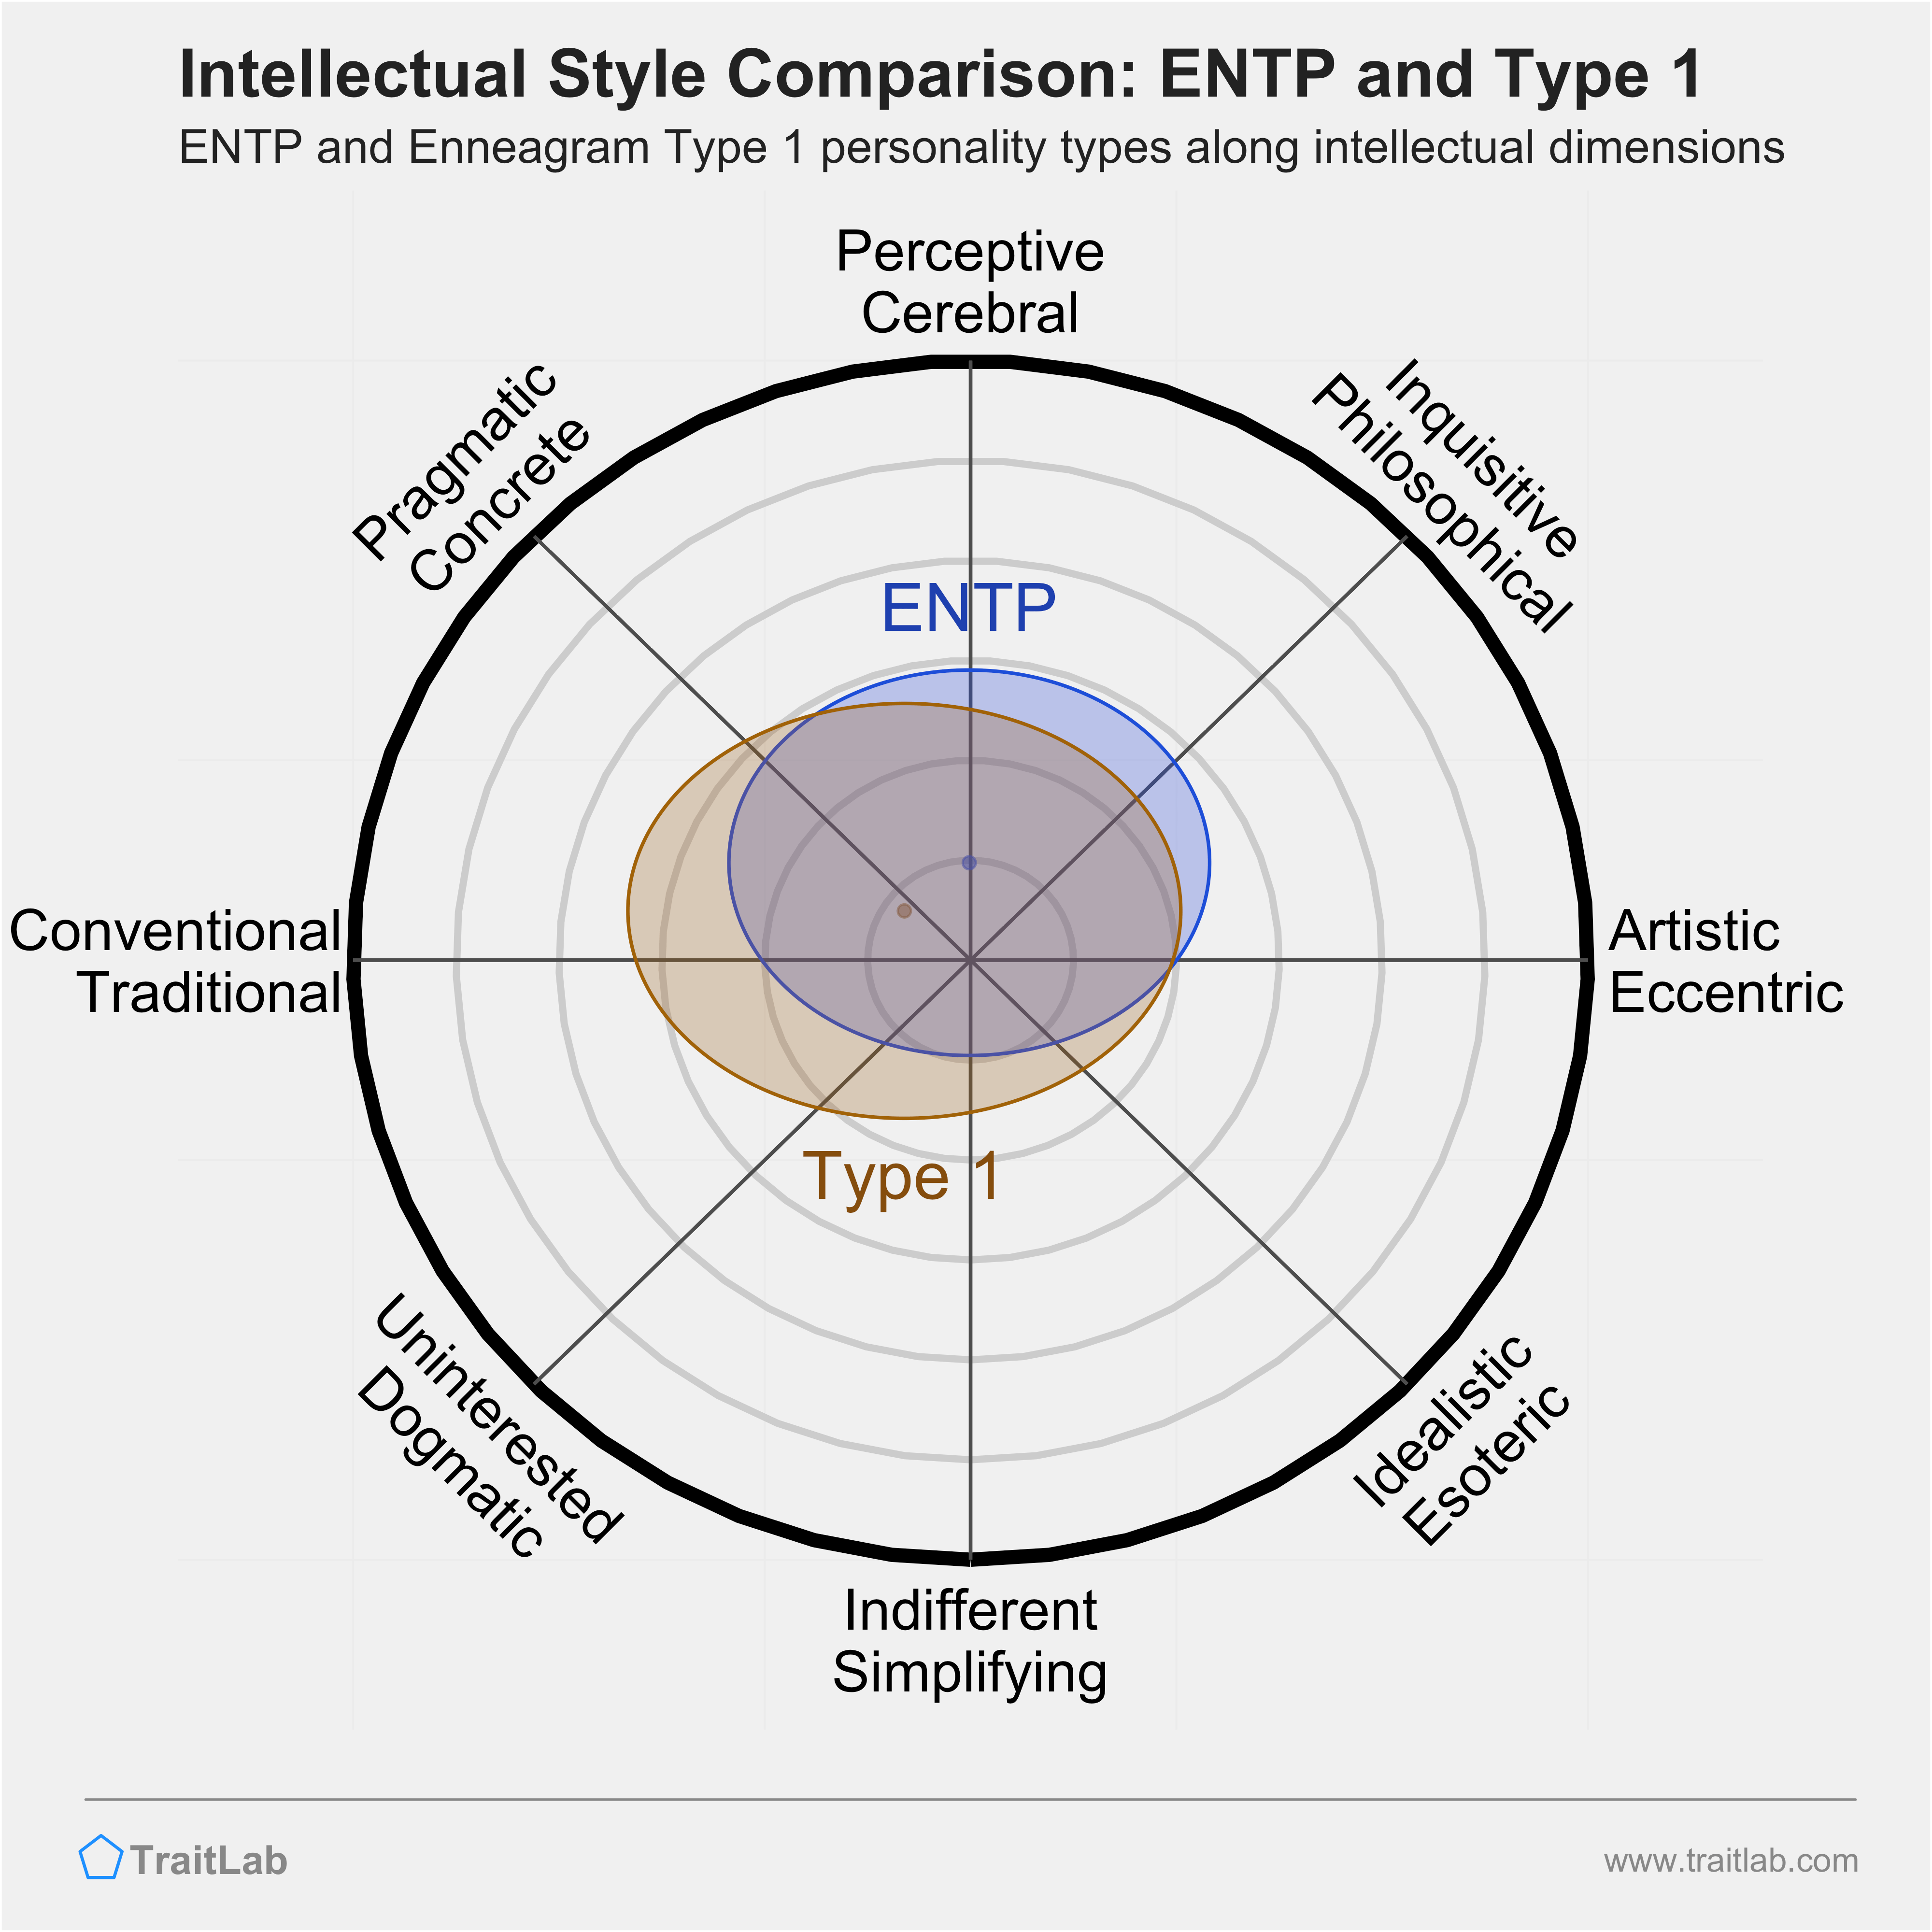 ENTP and Type 1 comparison across intellectual dimensions